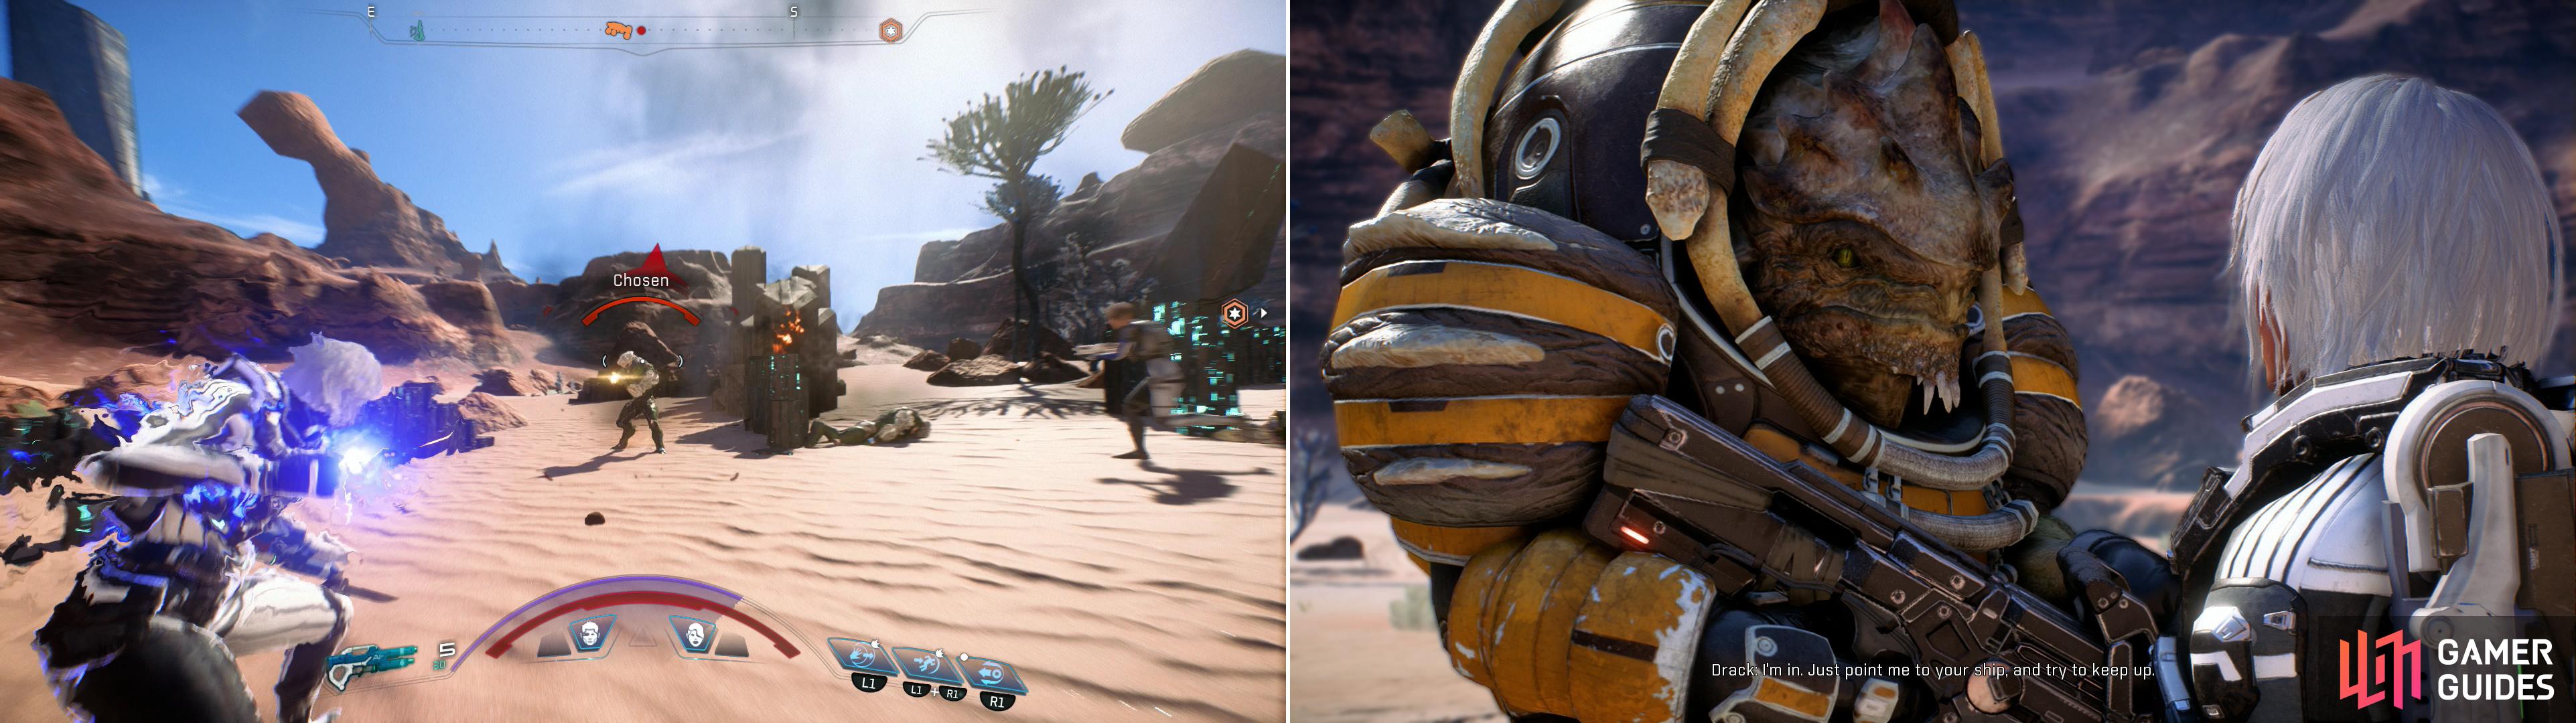 Kill the Kett near the outpost site (left), after which Drack will join your team (right).